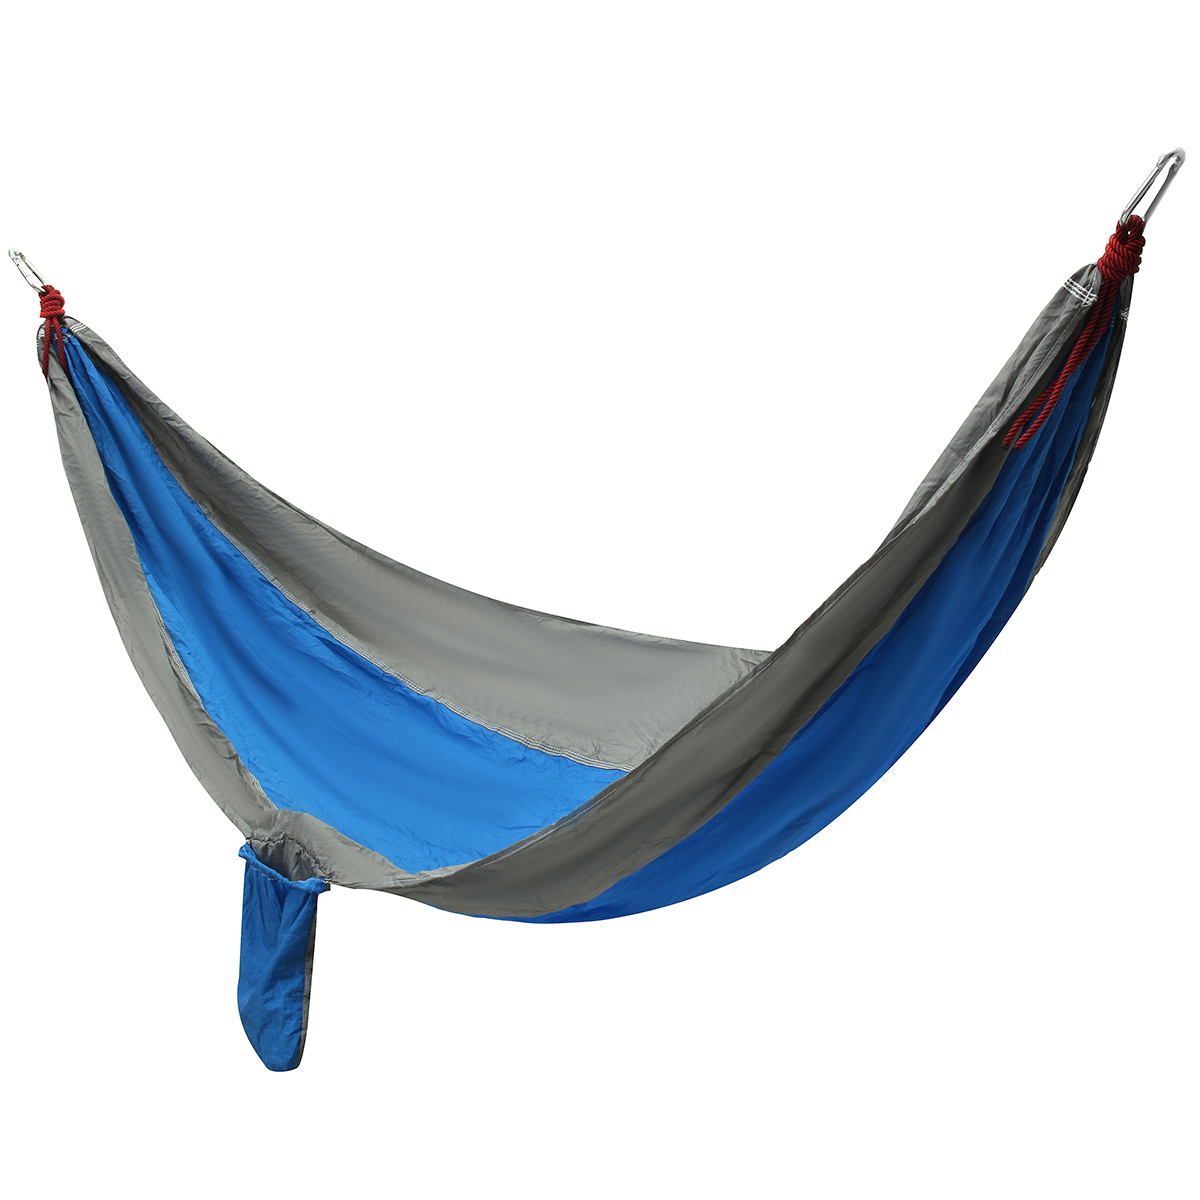 Single-People-Hanging-Swing-Bed-Camping-Hammock-Outdoor-Garden-Travel-with-Storage-Bag-Carabiner-Max-1732038-3